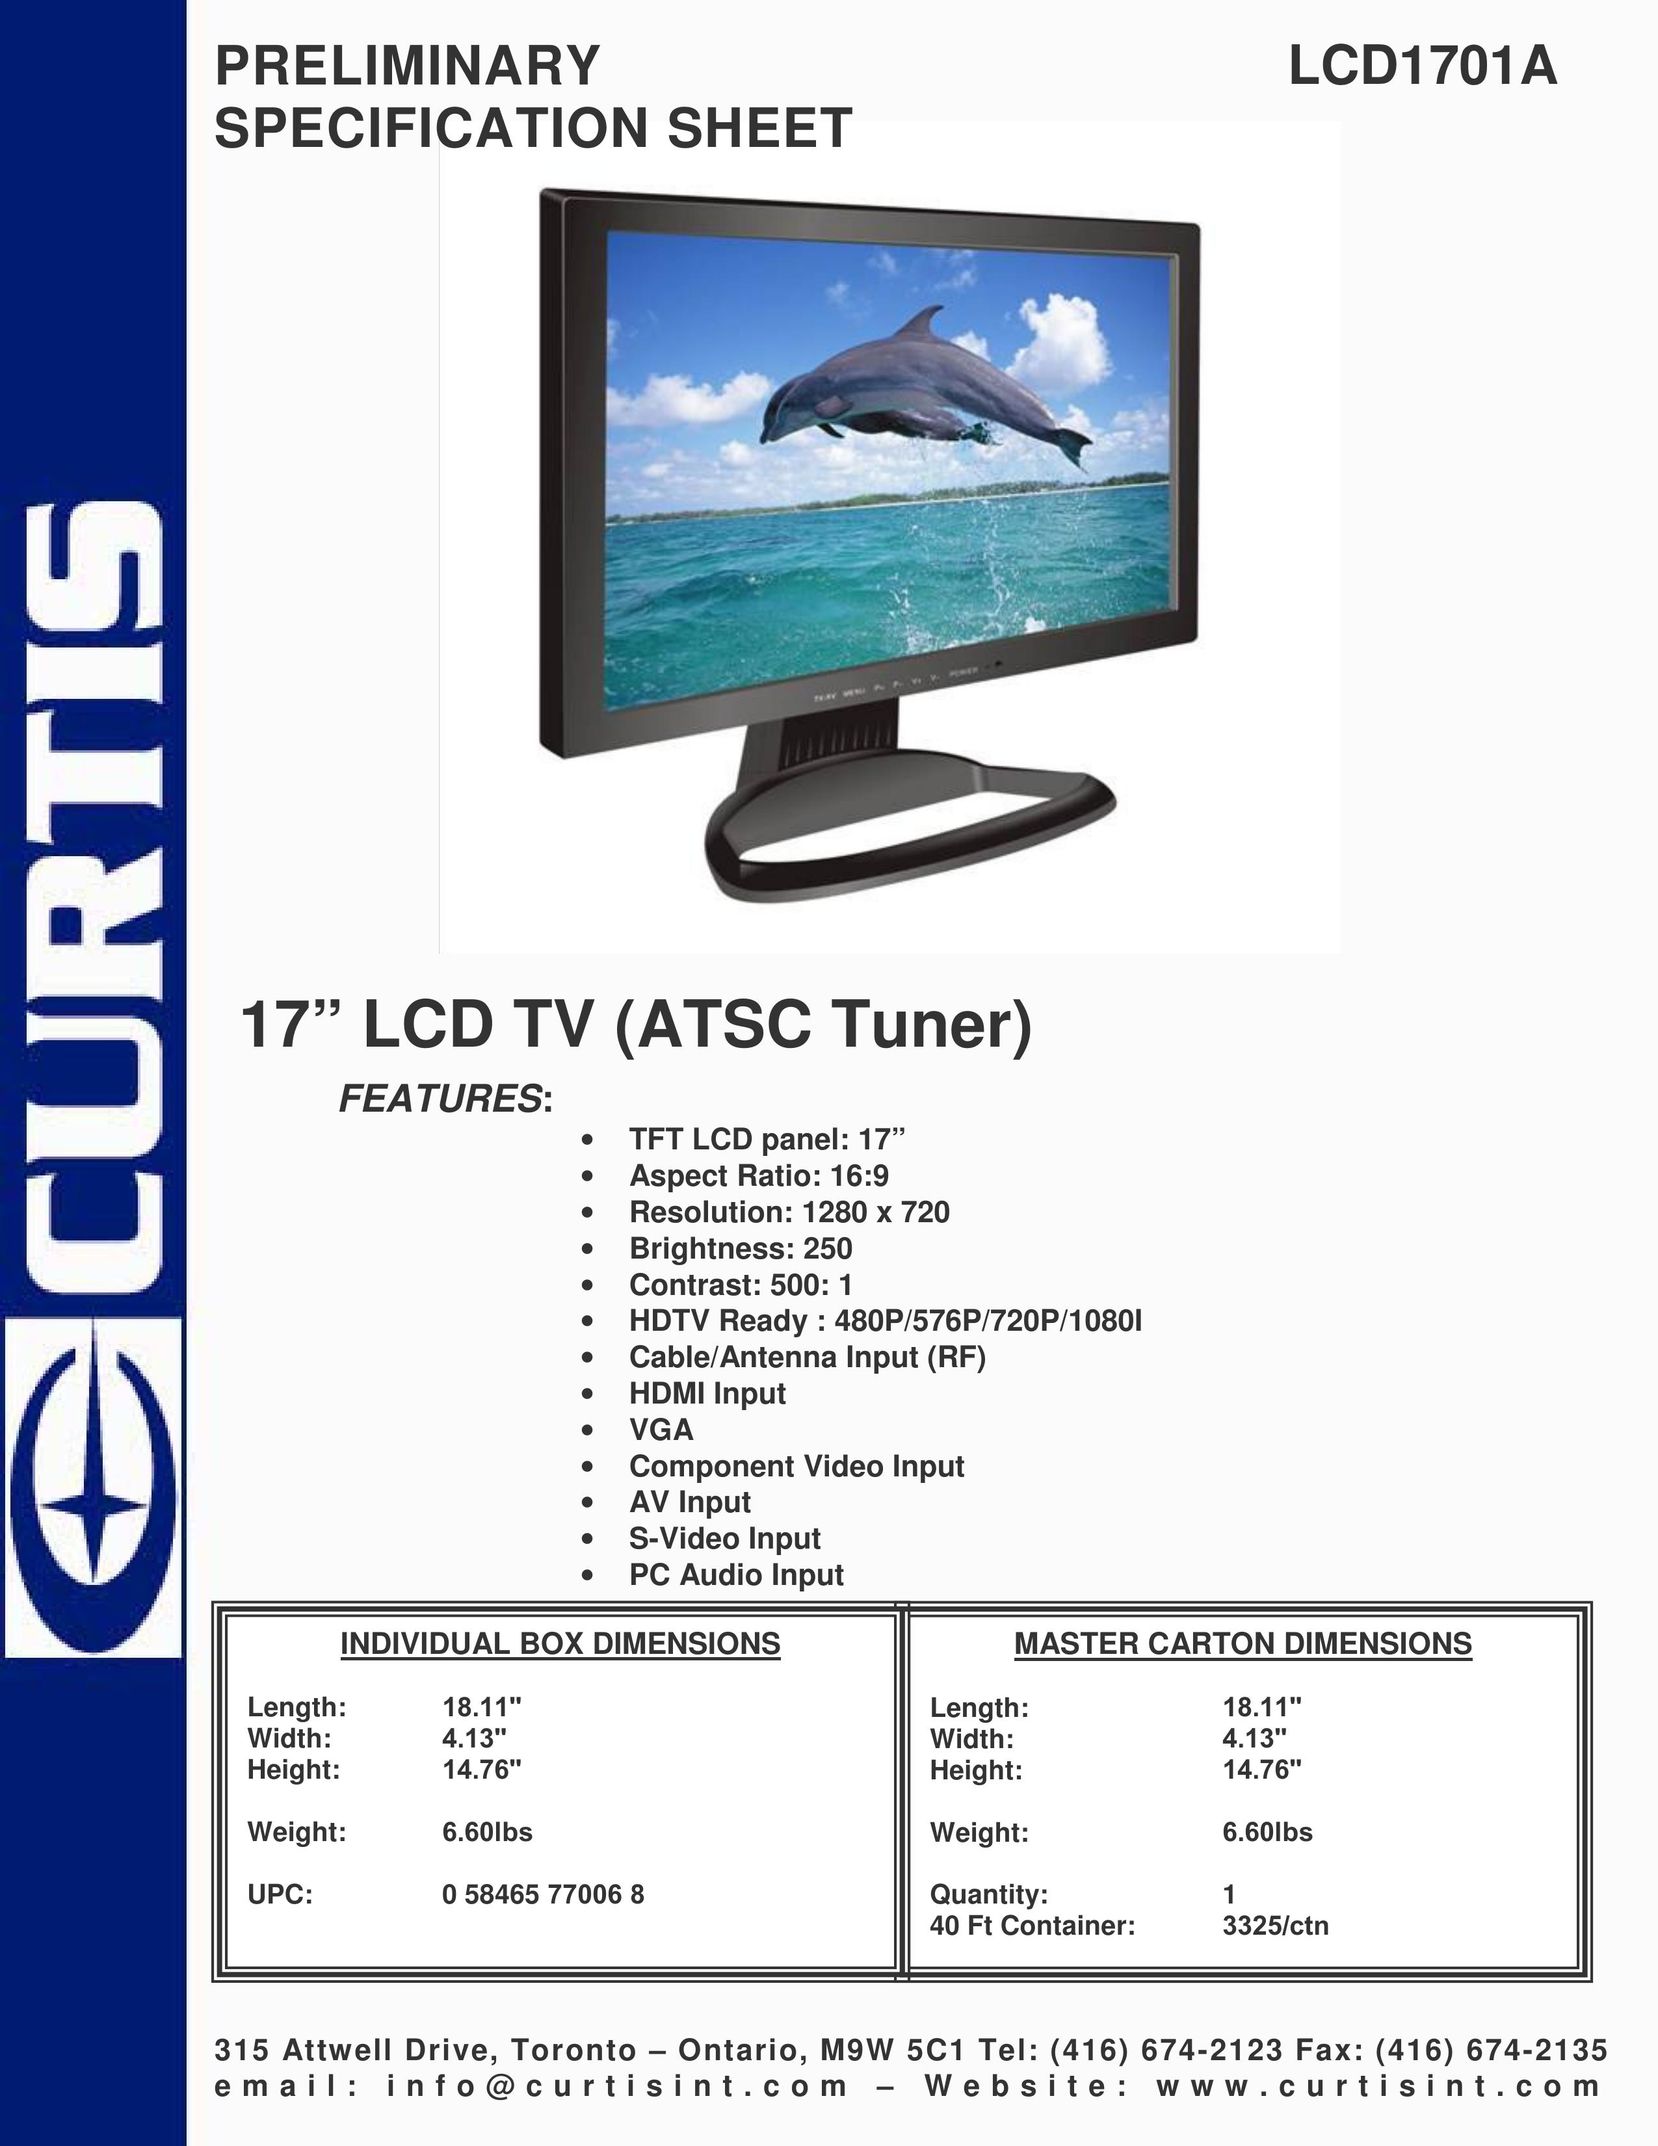 Curtis LCD1701A Flat Panel Television User Manual